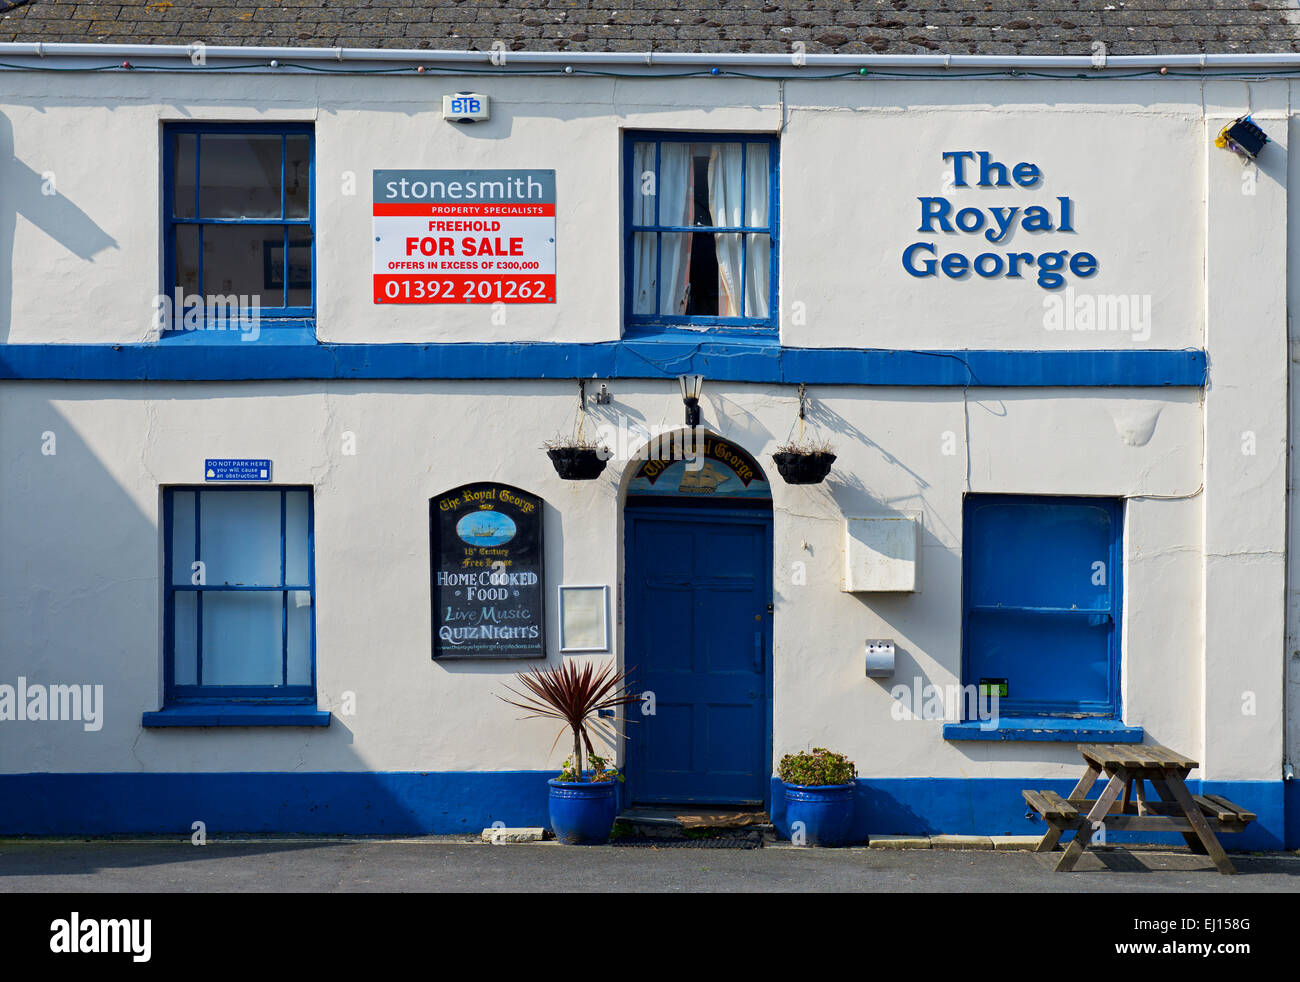 The Royal George pub - for sale - in Appledore, Devon. England UK Stock Photo